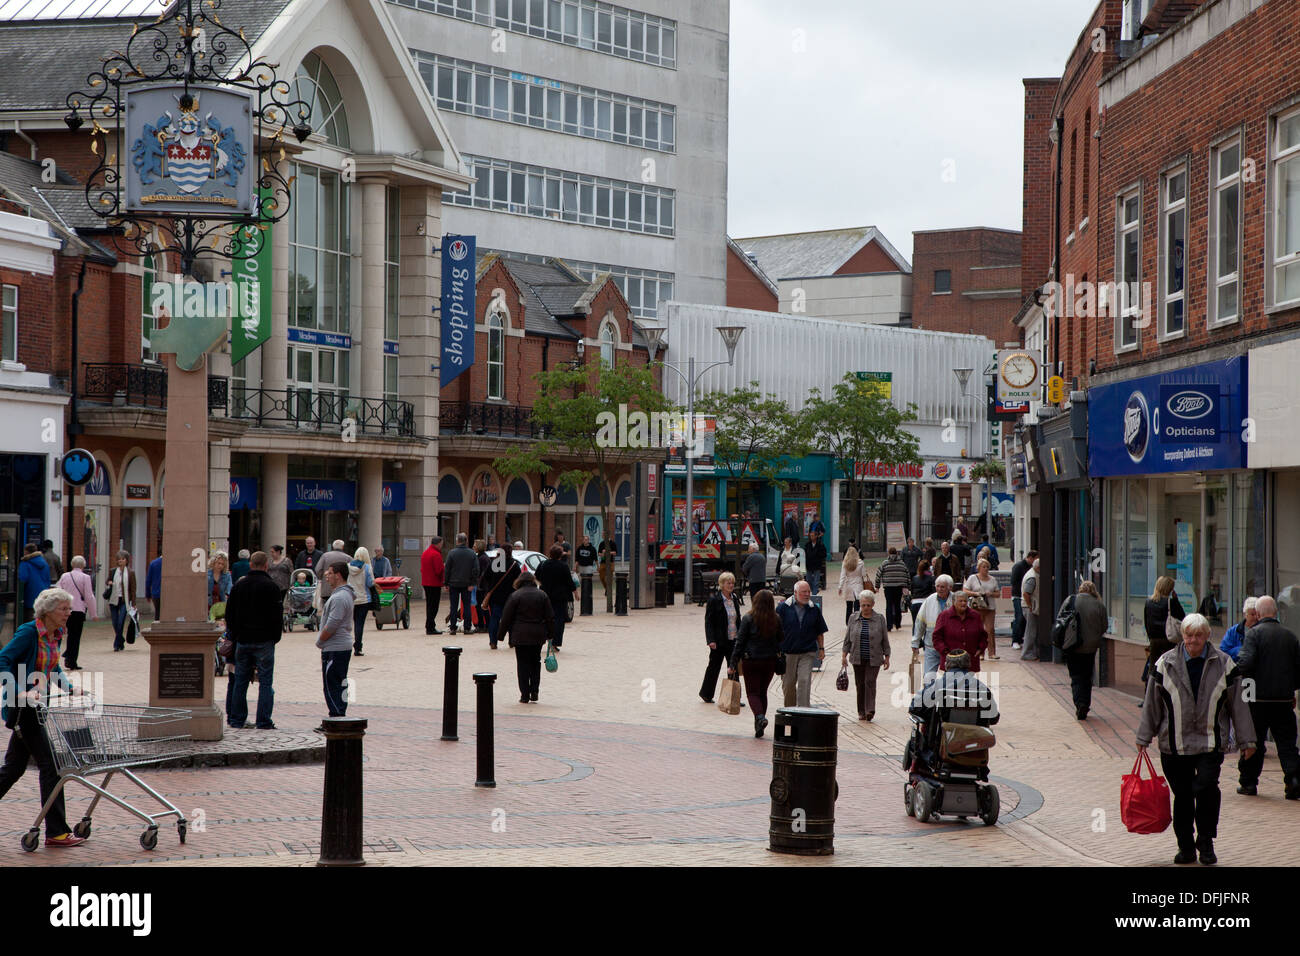 Chelmsford Essex centre, the pedestrianized high street with good access for wheelchairs Stock Photo